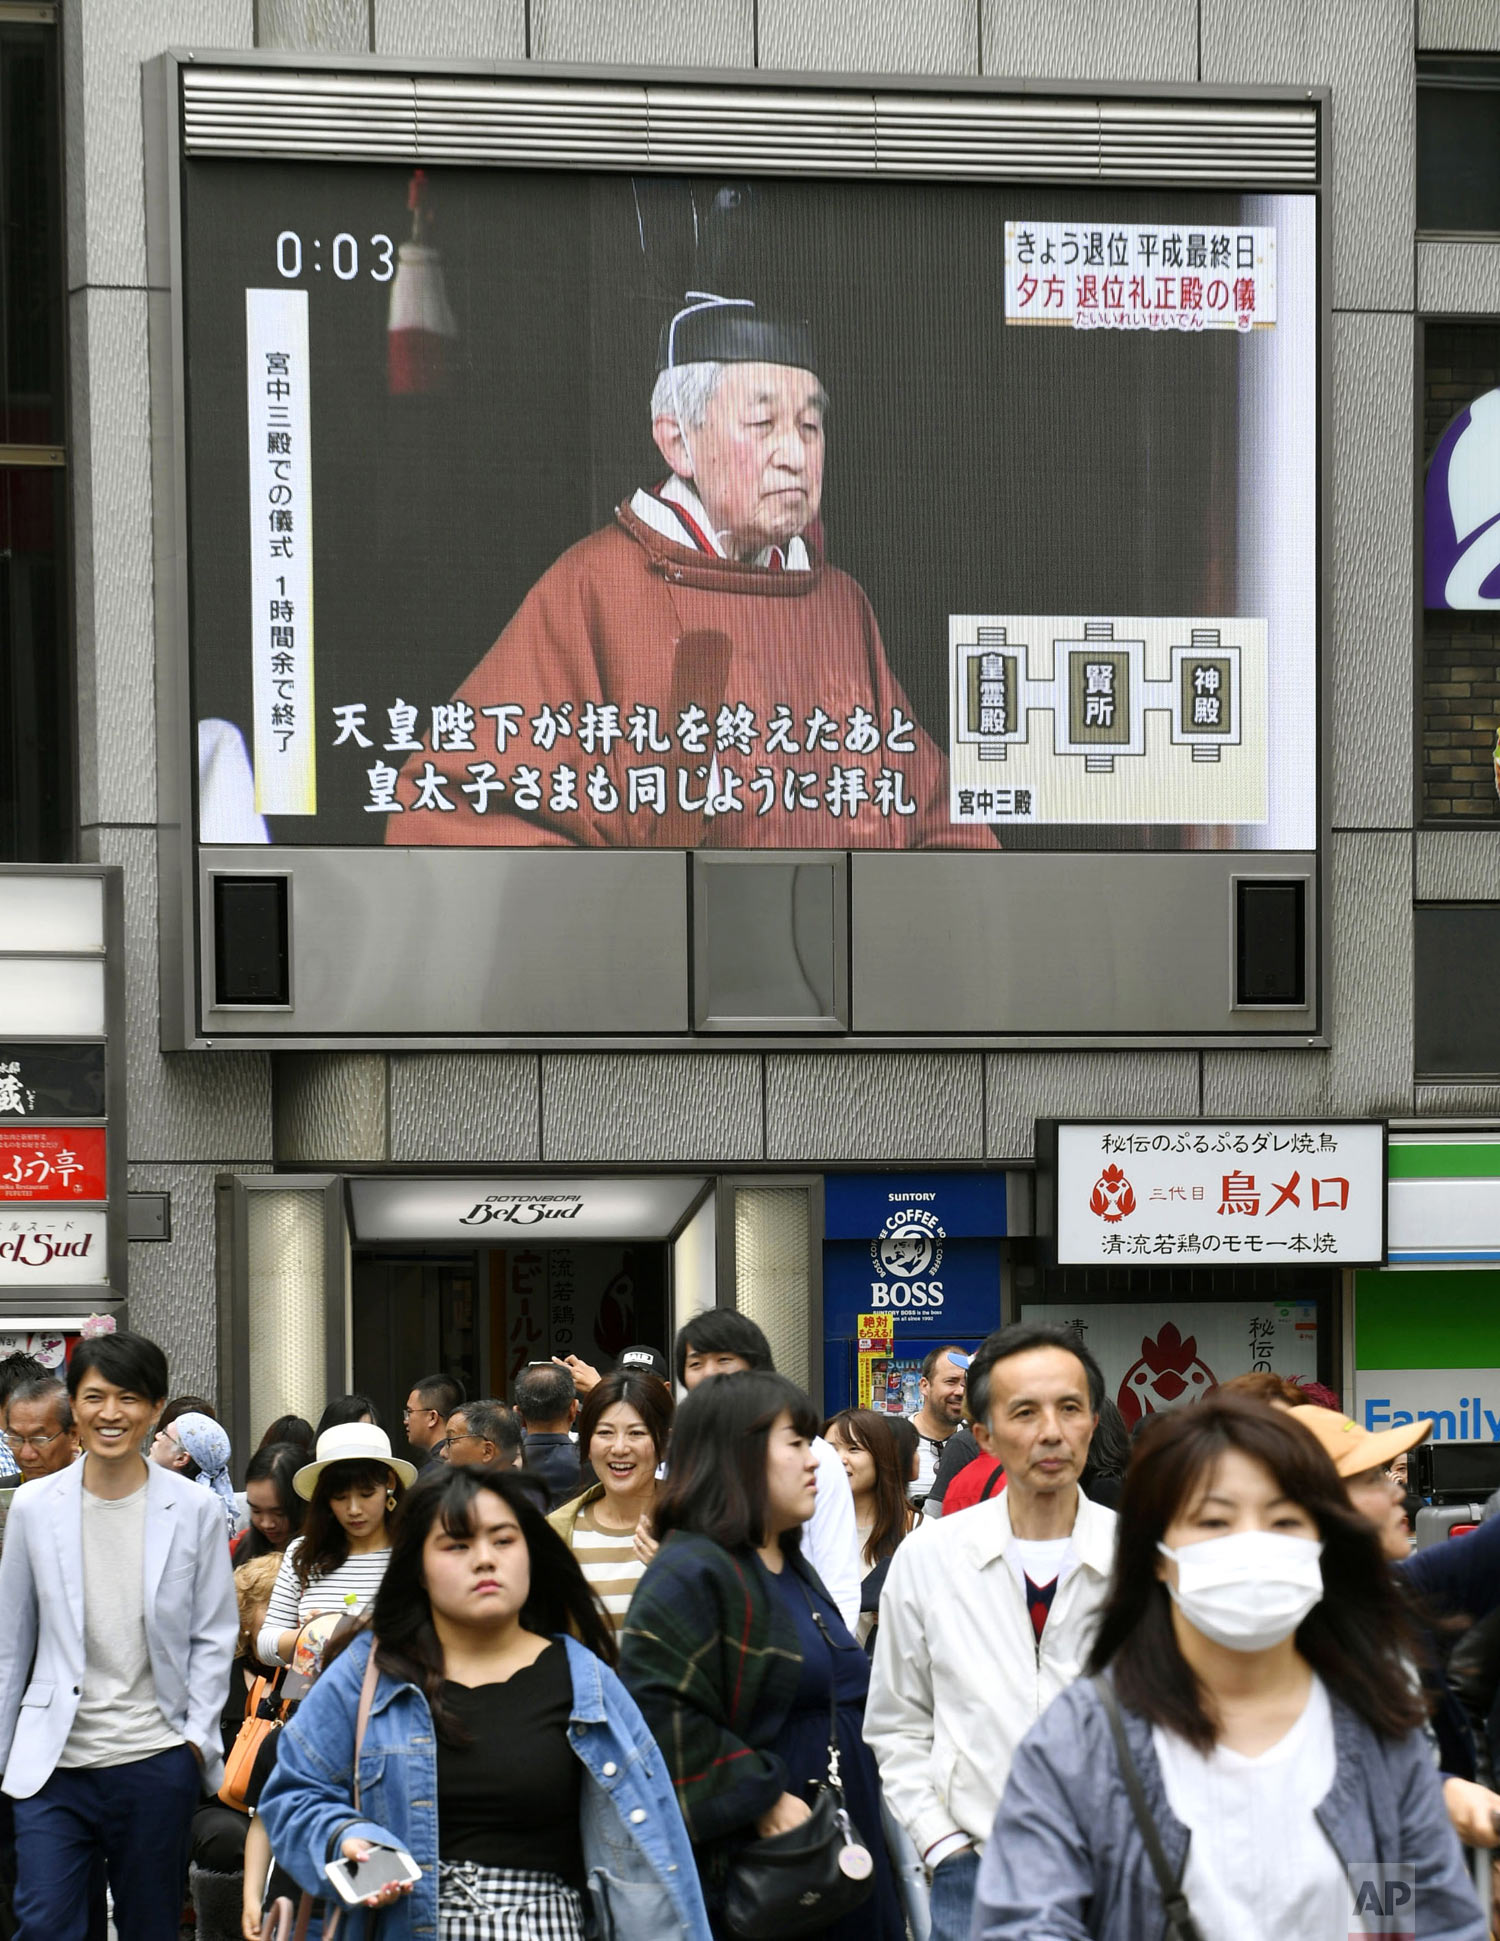  An outdoor screen displays Emperor Akihito leaving a ritual to report his abdication to the throne, shown in a news program in Osaka, western Japan, Tuesday, April 30, 2019. The 85-year-old Akihito ended his three-decade reign on Tuesday relinquishi